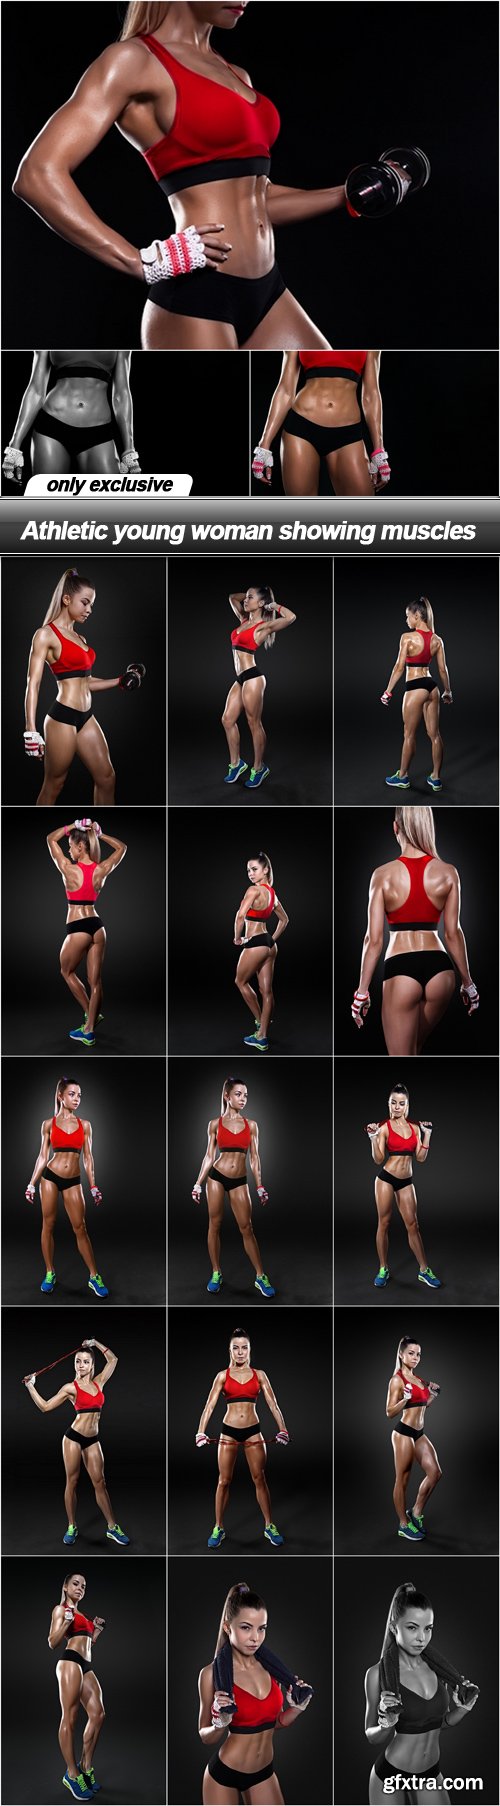 Athletic young woman showing muscles - 18 UHQ JPEG